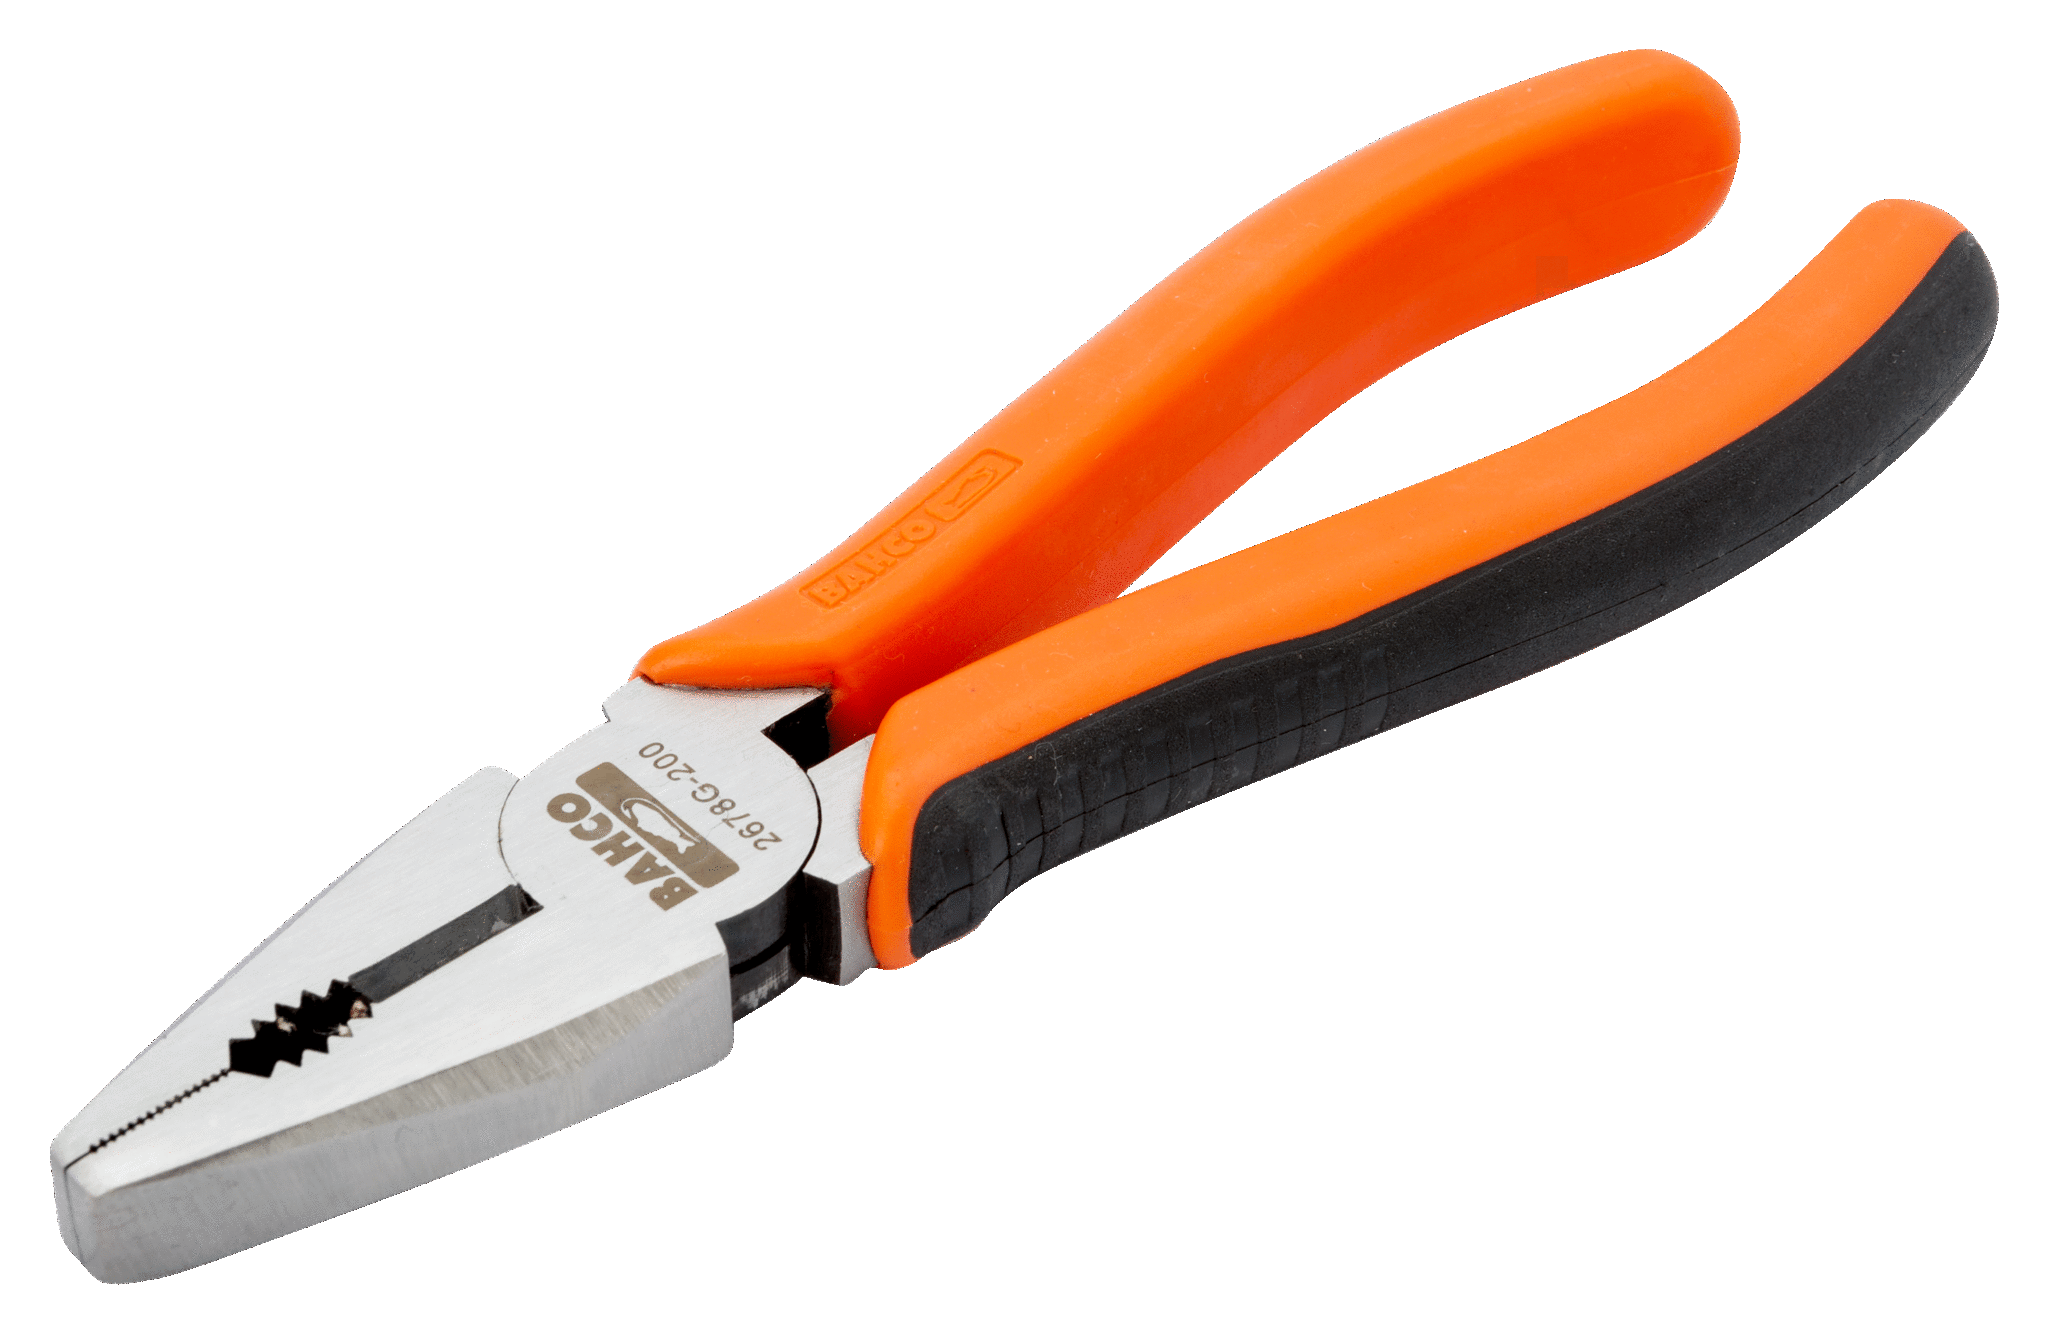 Bahco 2628g Combination Pliers Ergo Handles 180mm for sale online 